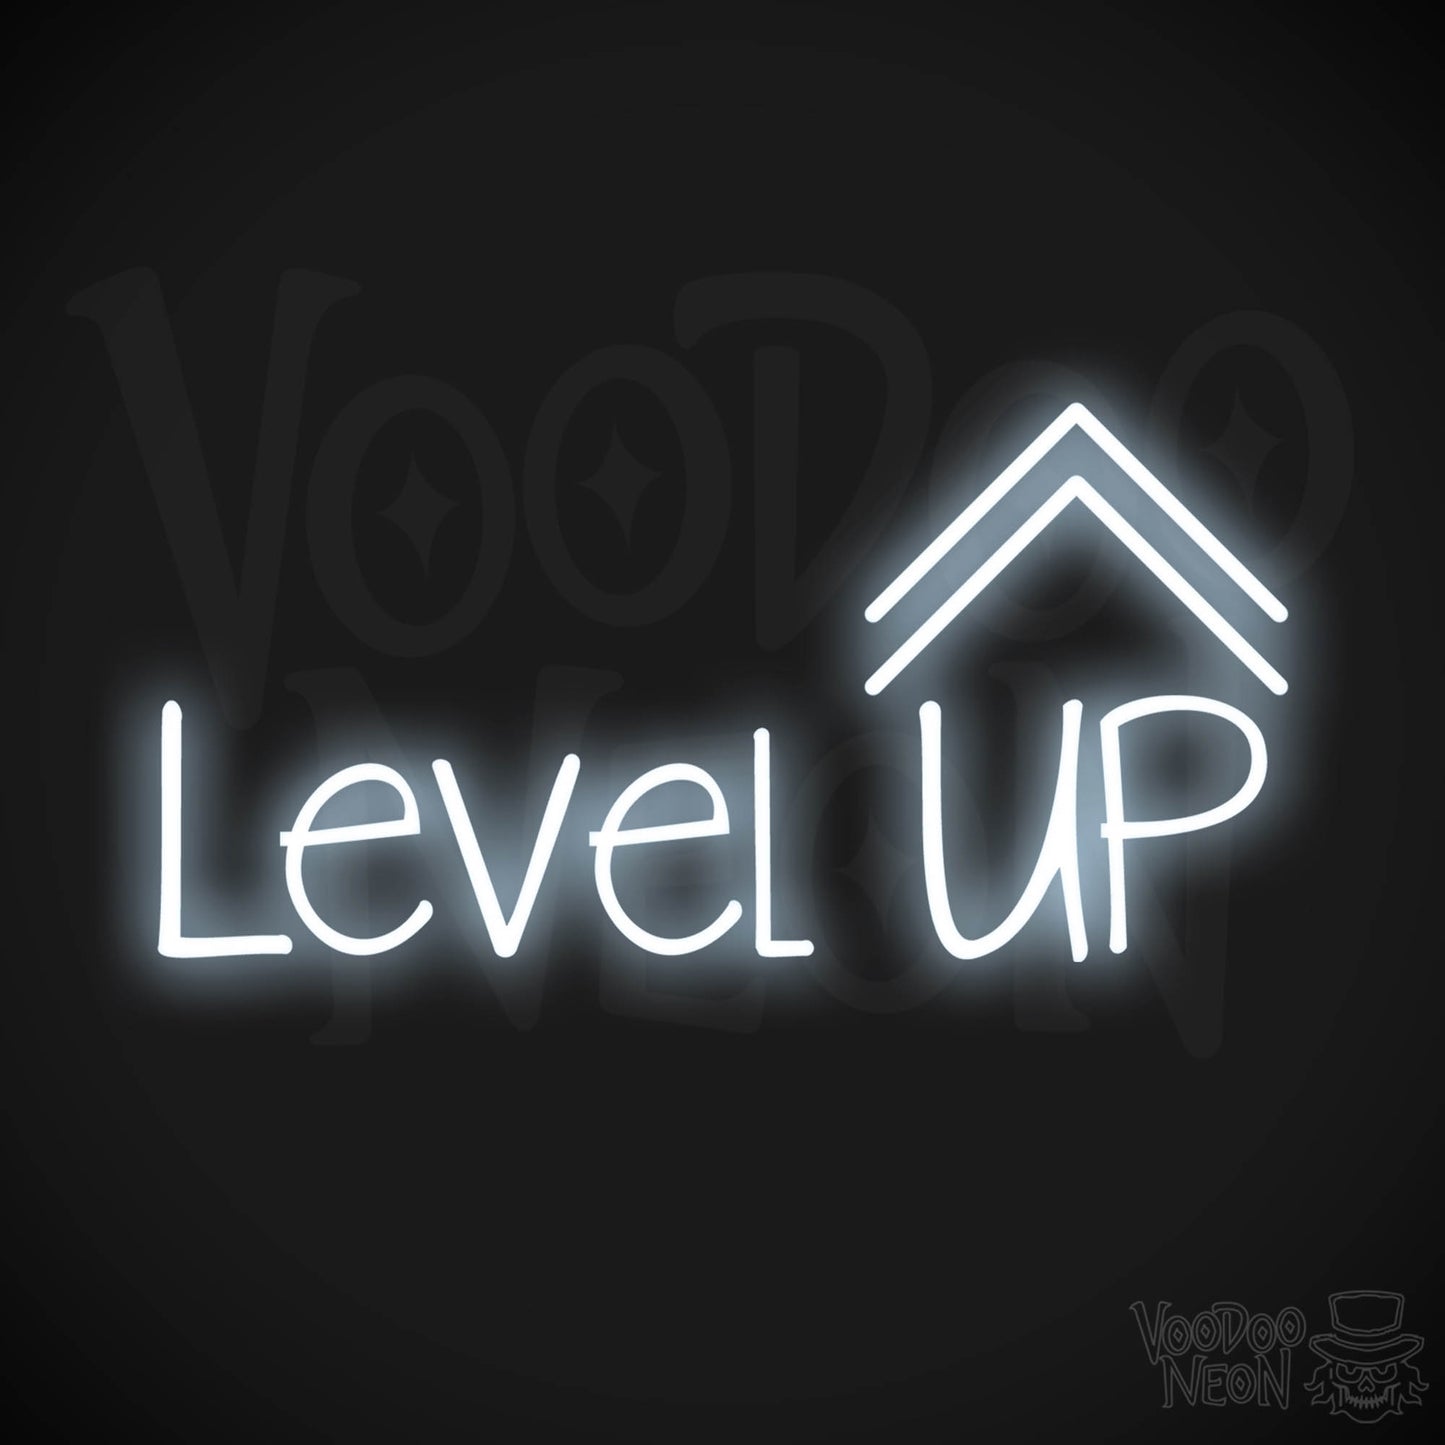 Level Up LED Neon - Cool White